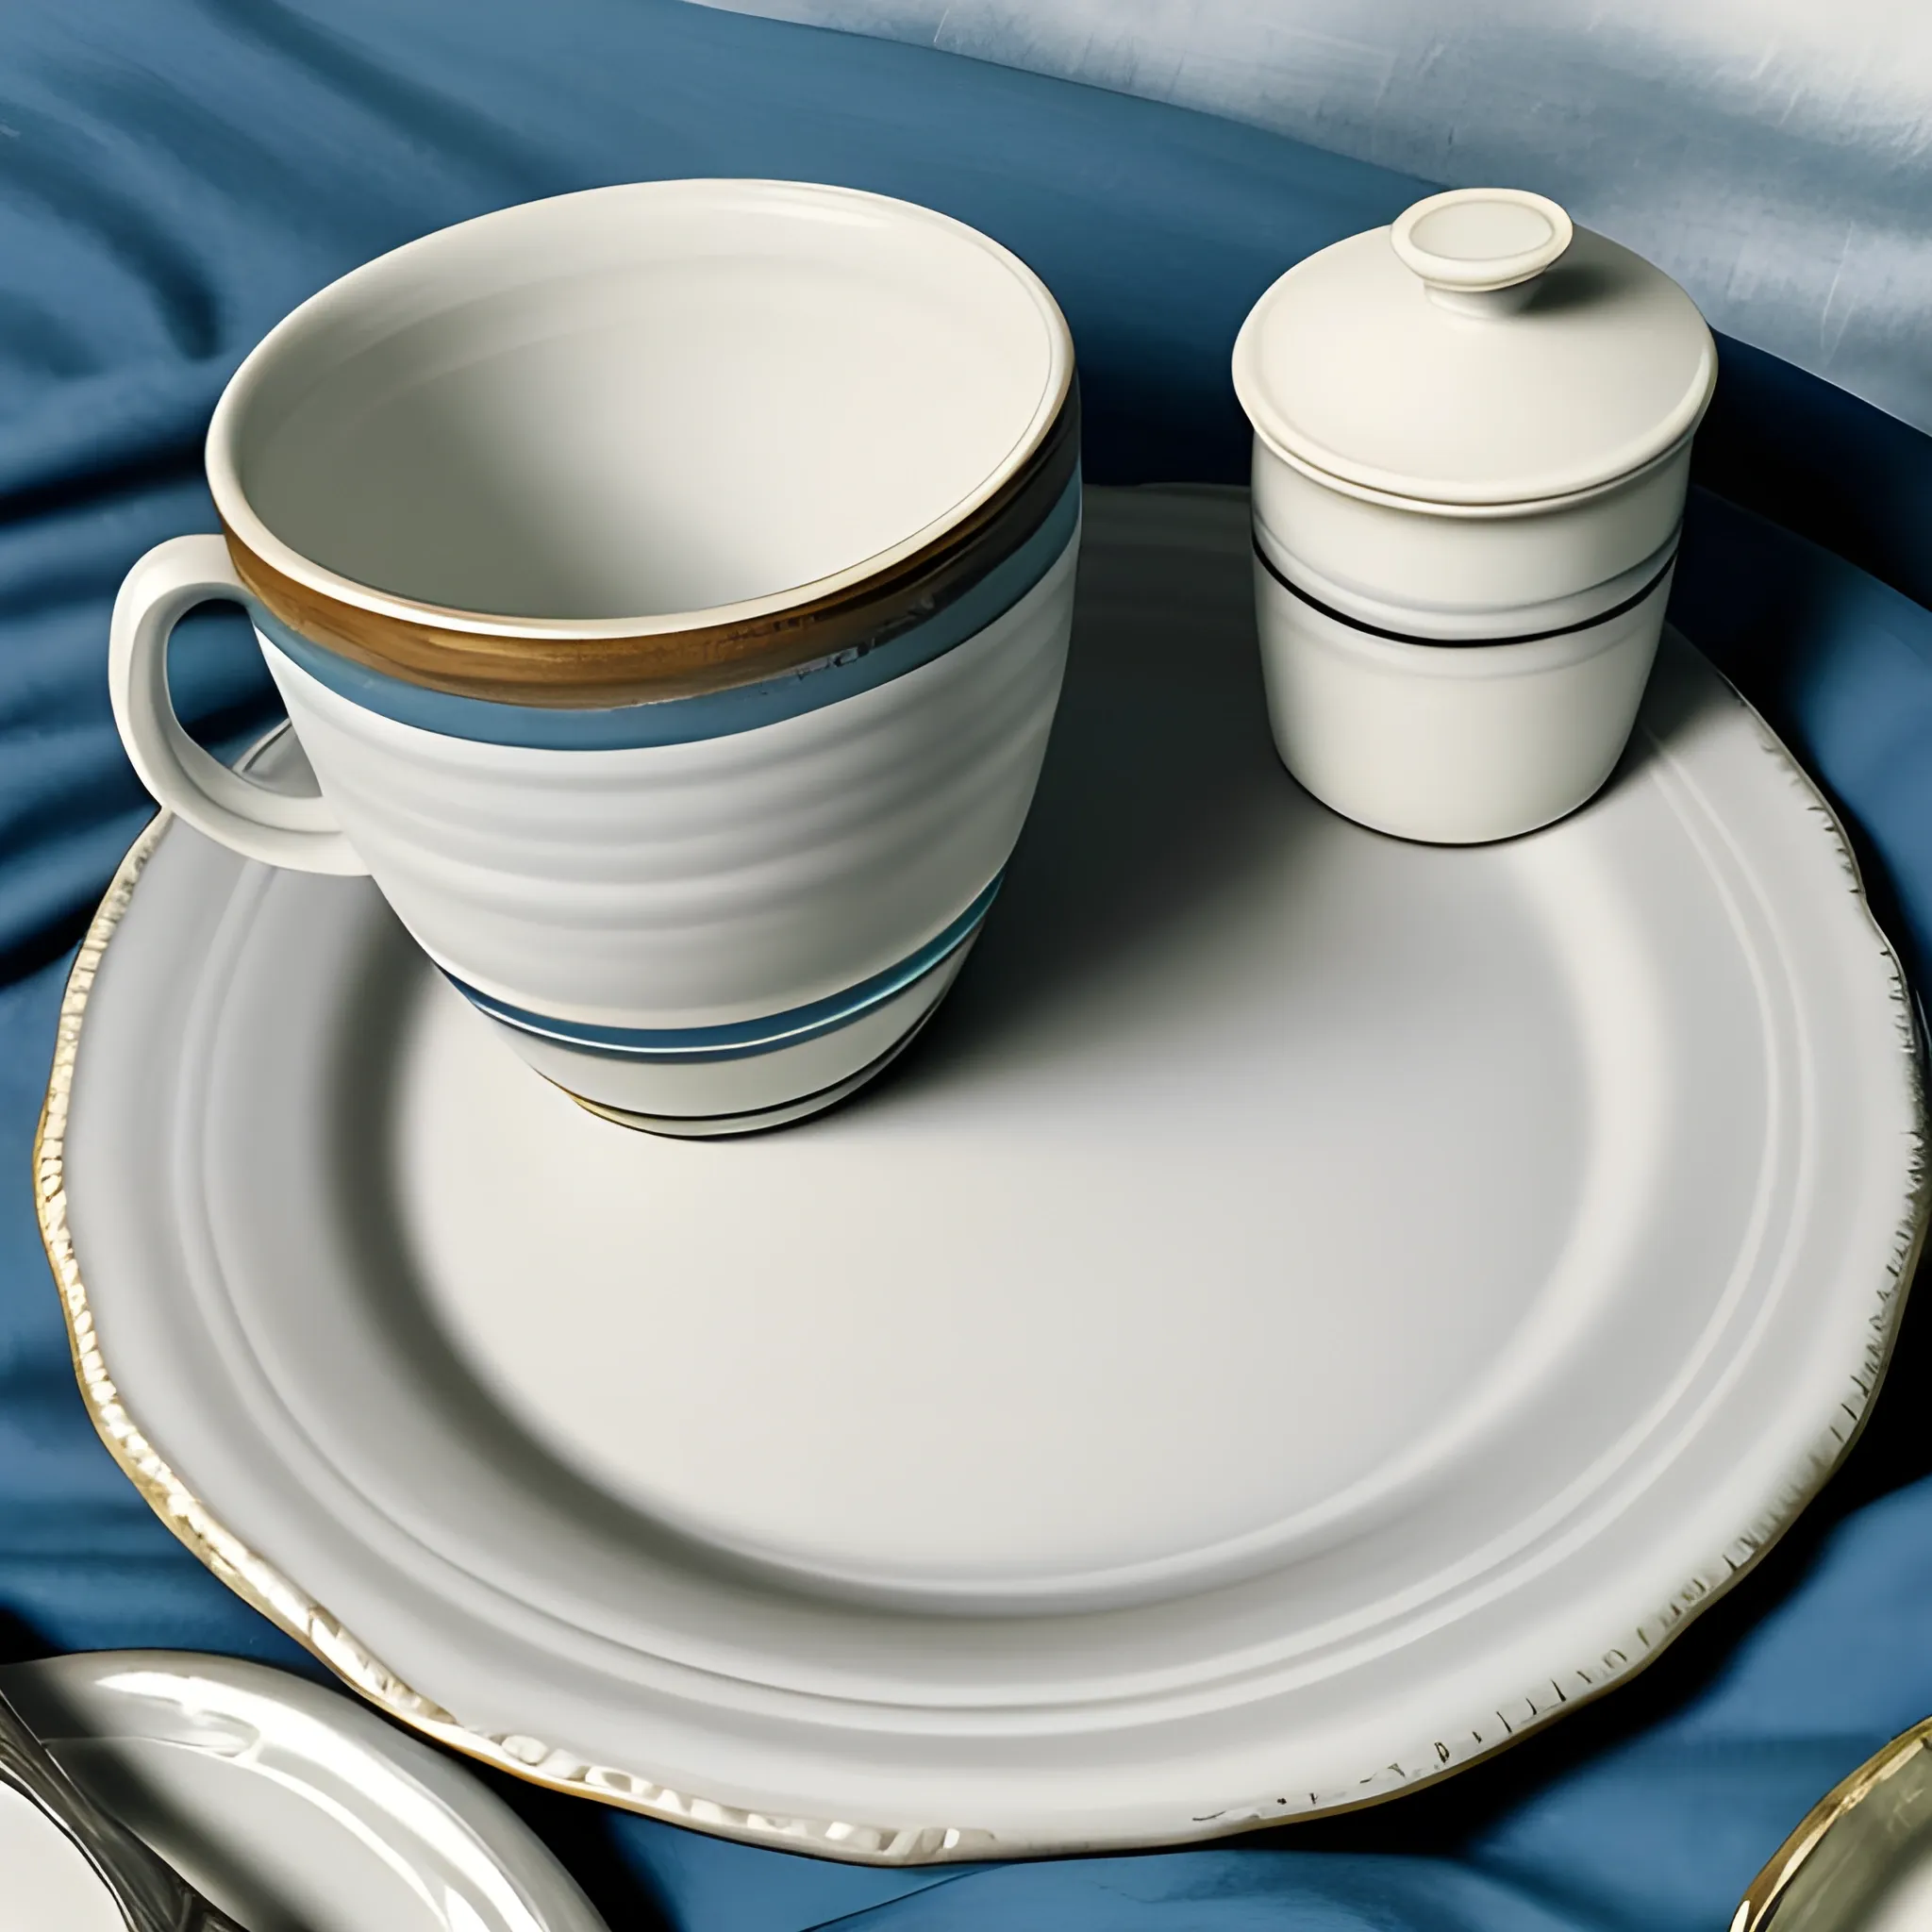 close up shot of items on a clean bed, cup, plates, clean, still life, very coherent, painted by kristy mcintyre, painted by bethany saab
